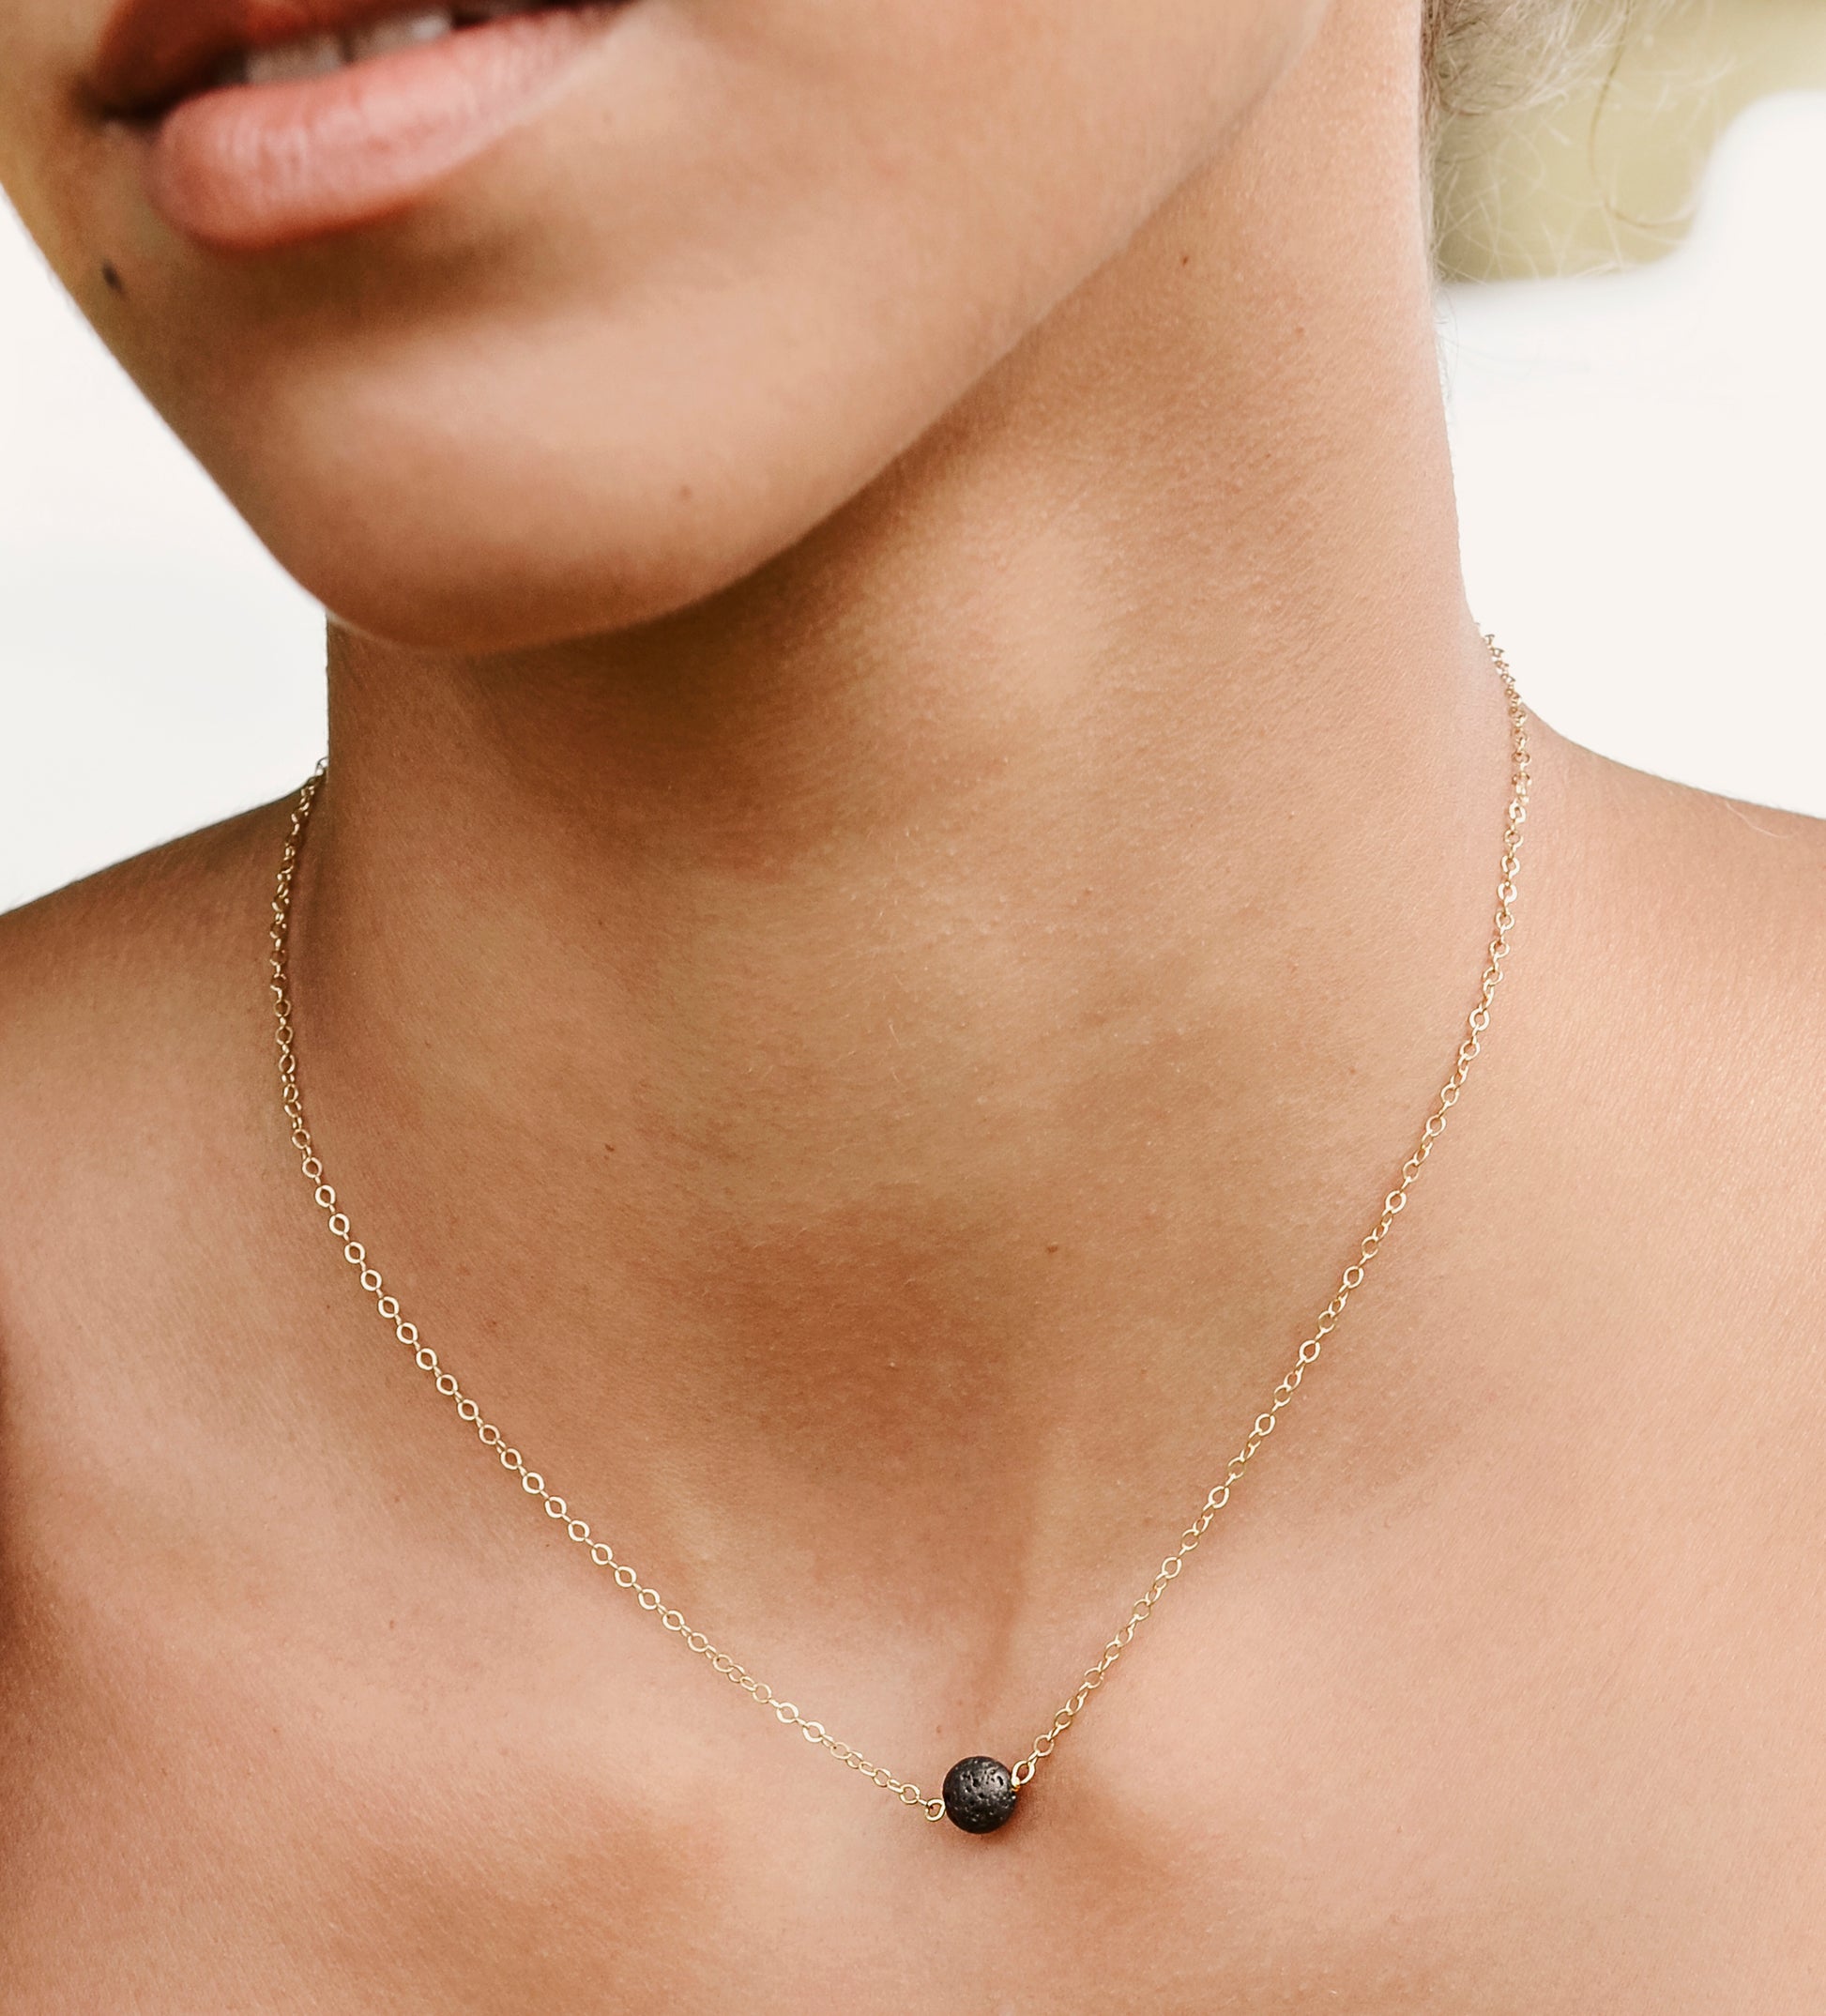 Handmade genuine black lava round stone placed onto a gold filled chain. 